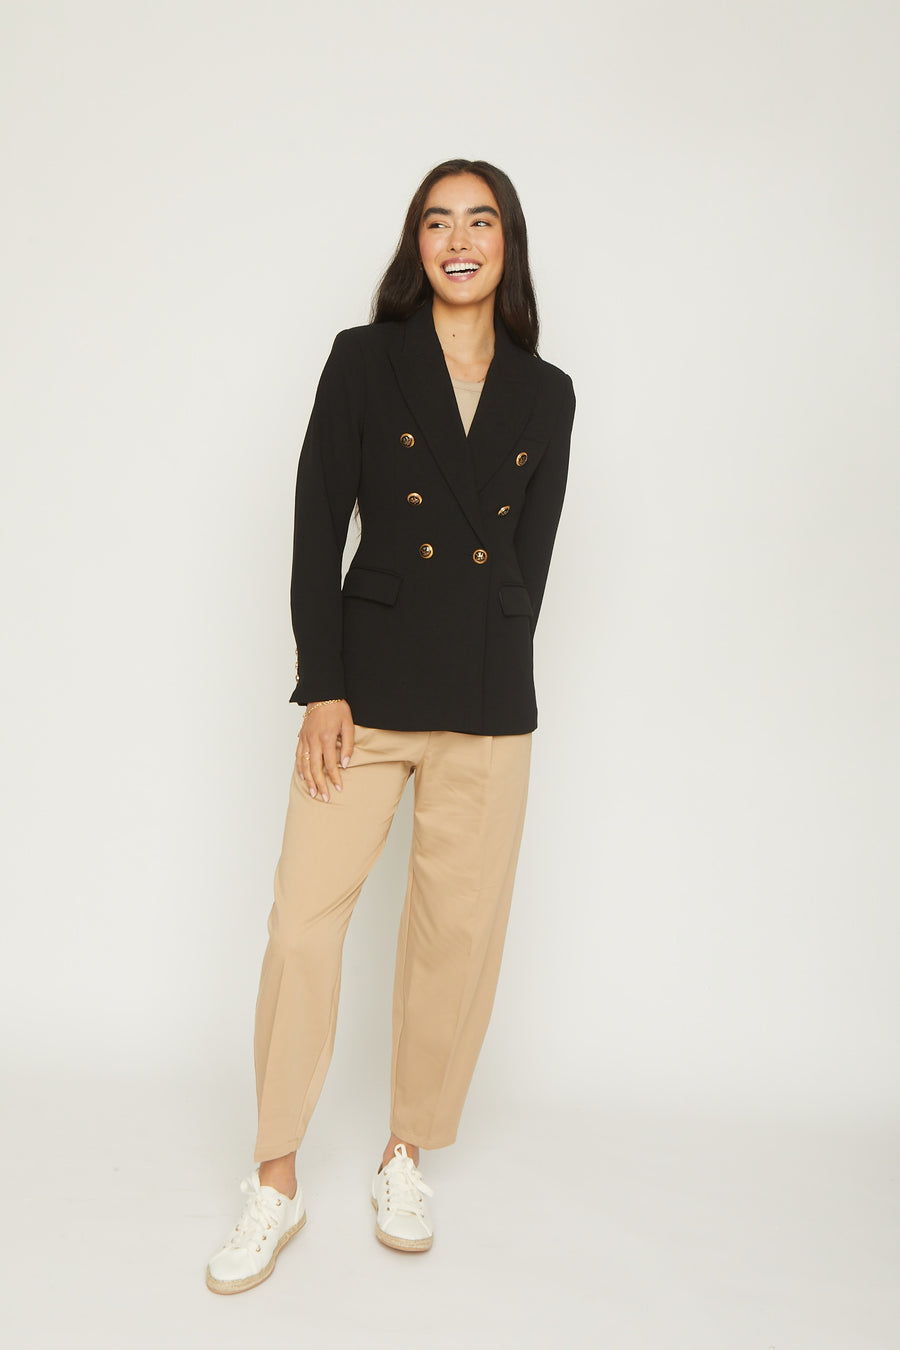 No Srcipt image - Images of 1 of 13 classic double breasted blazer, black blazer, gold button details, black color, tailored blazer